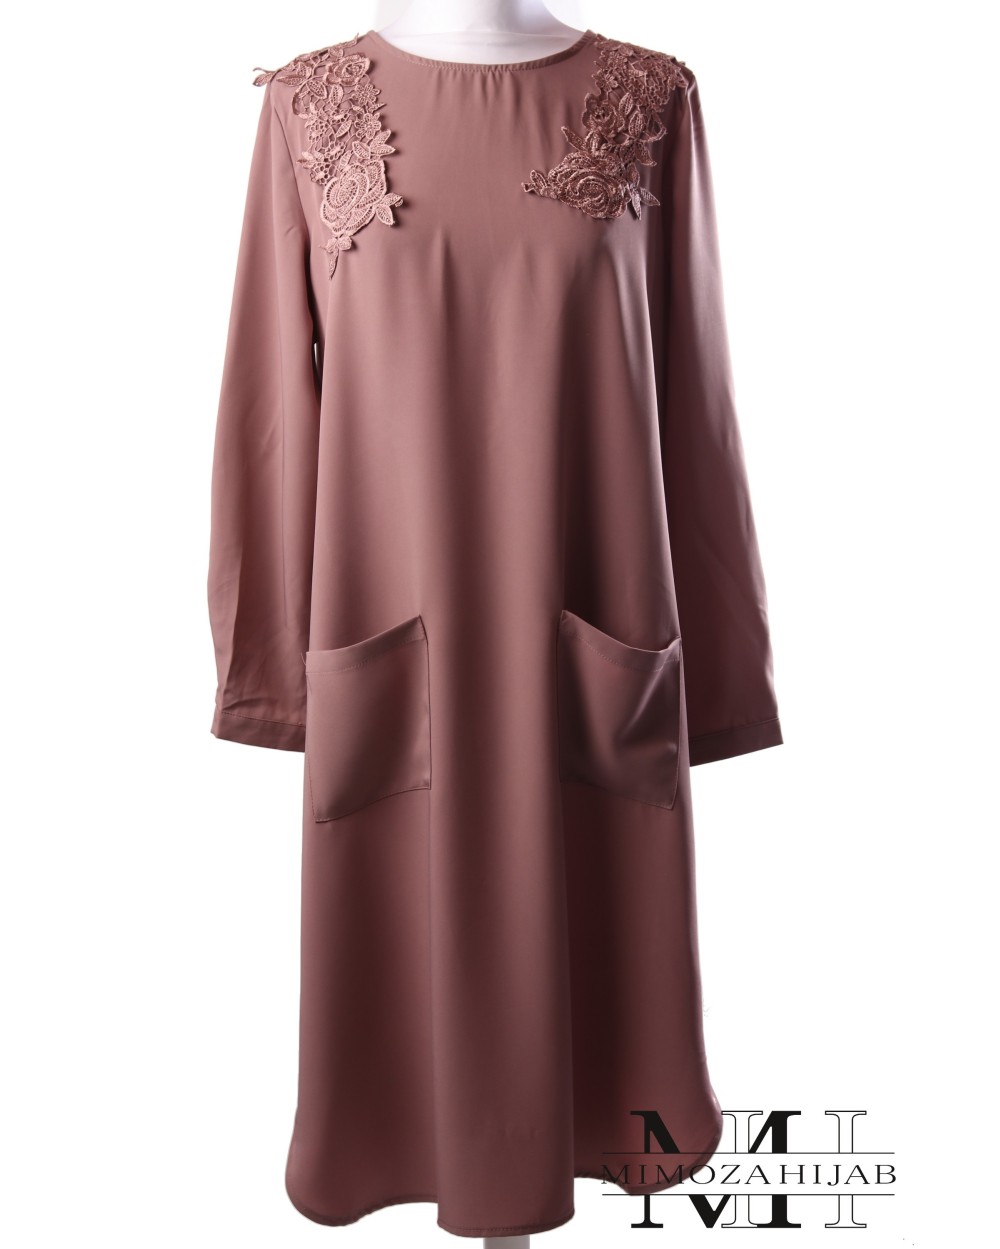 Azirah mid-length tunic pockets and lace